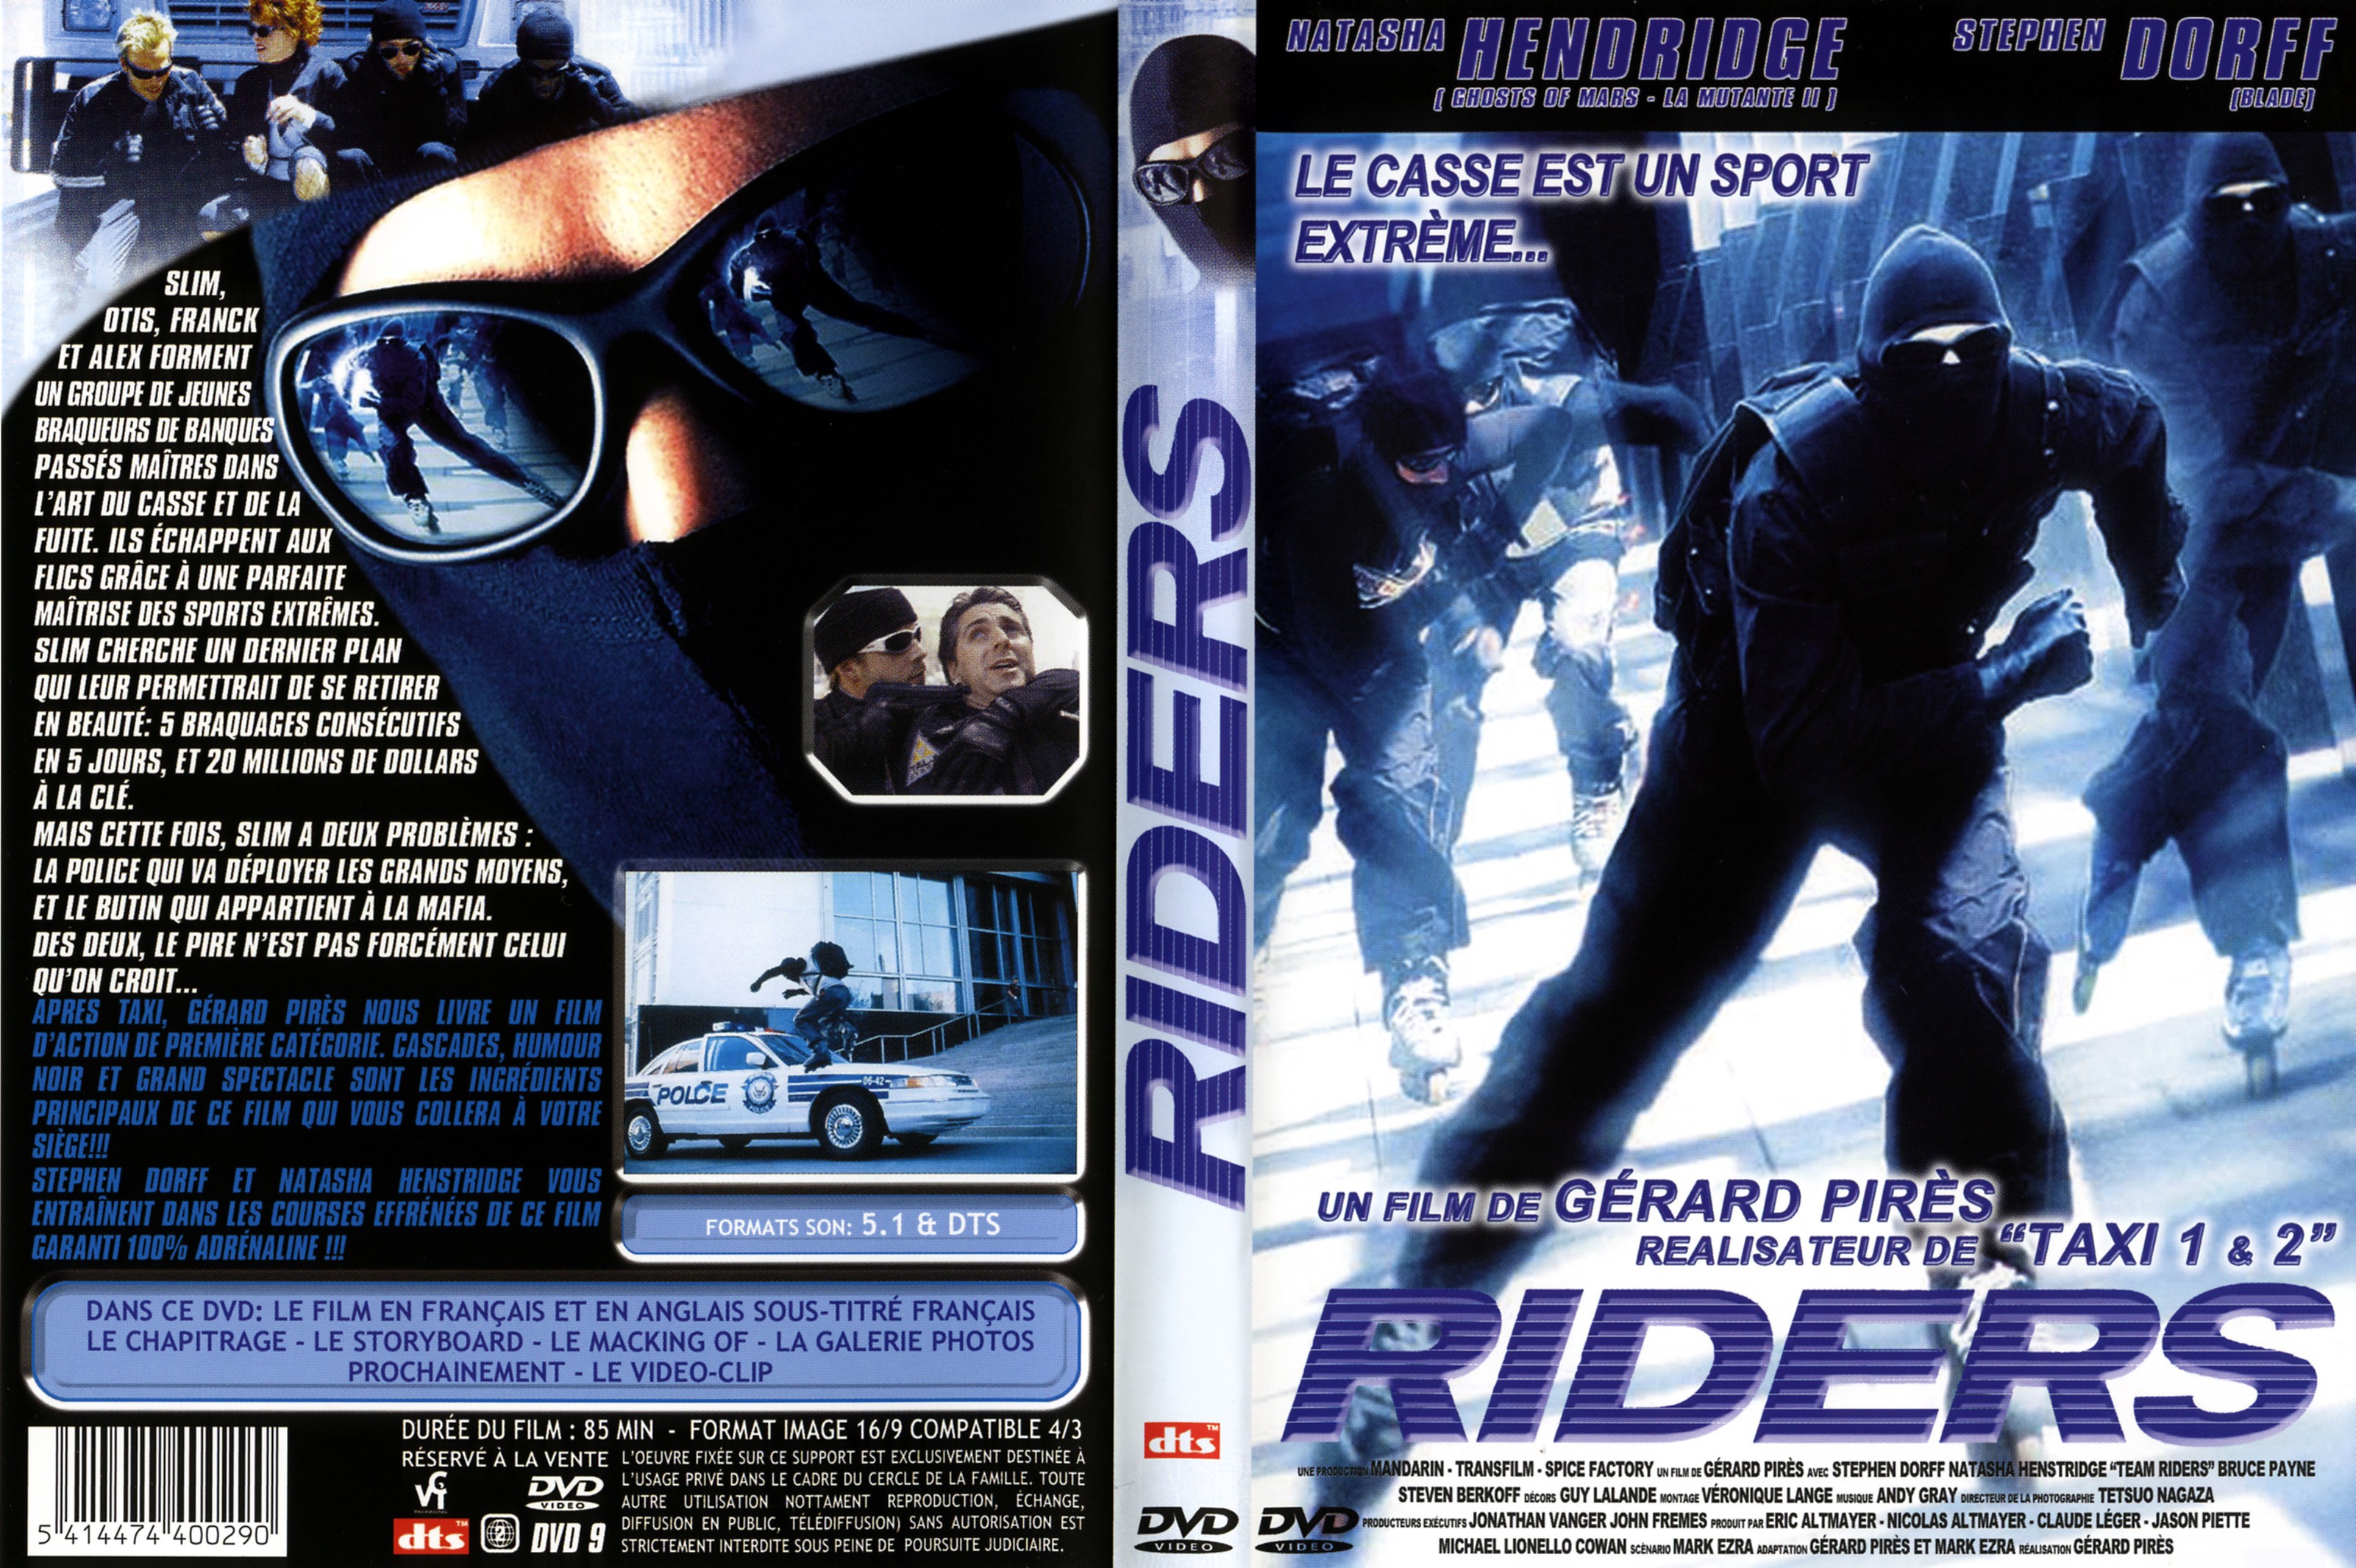 Jaquette DVD Riders v2